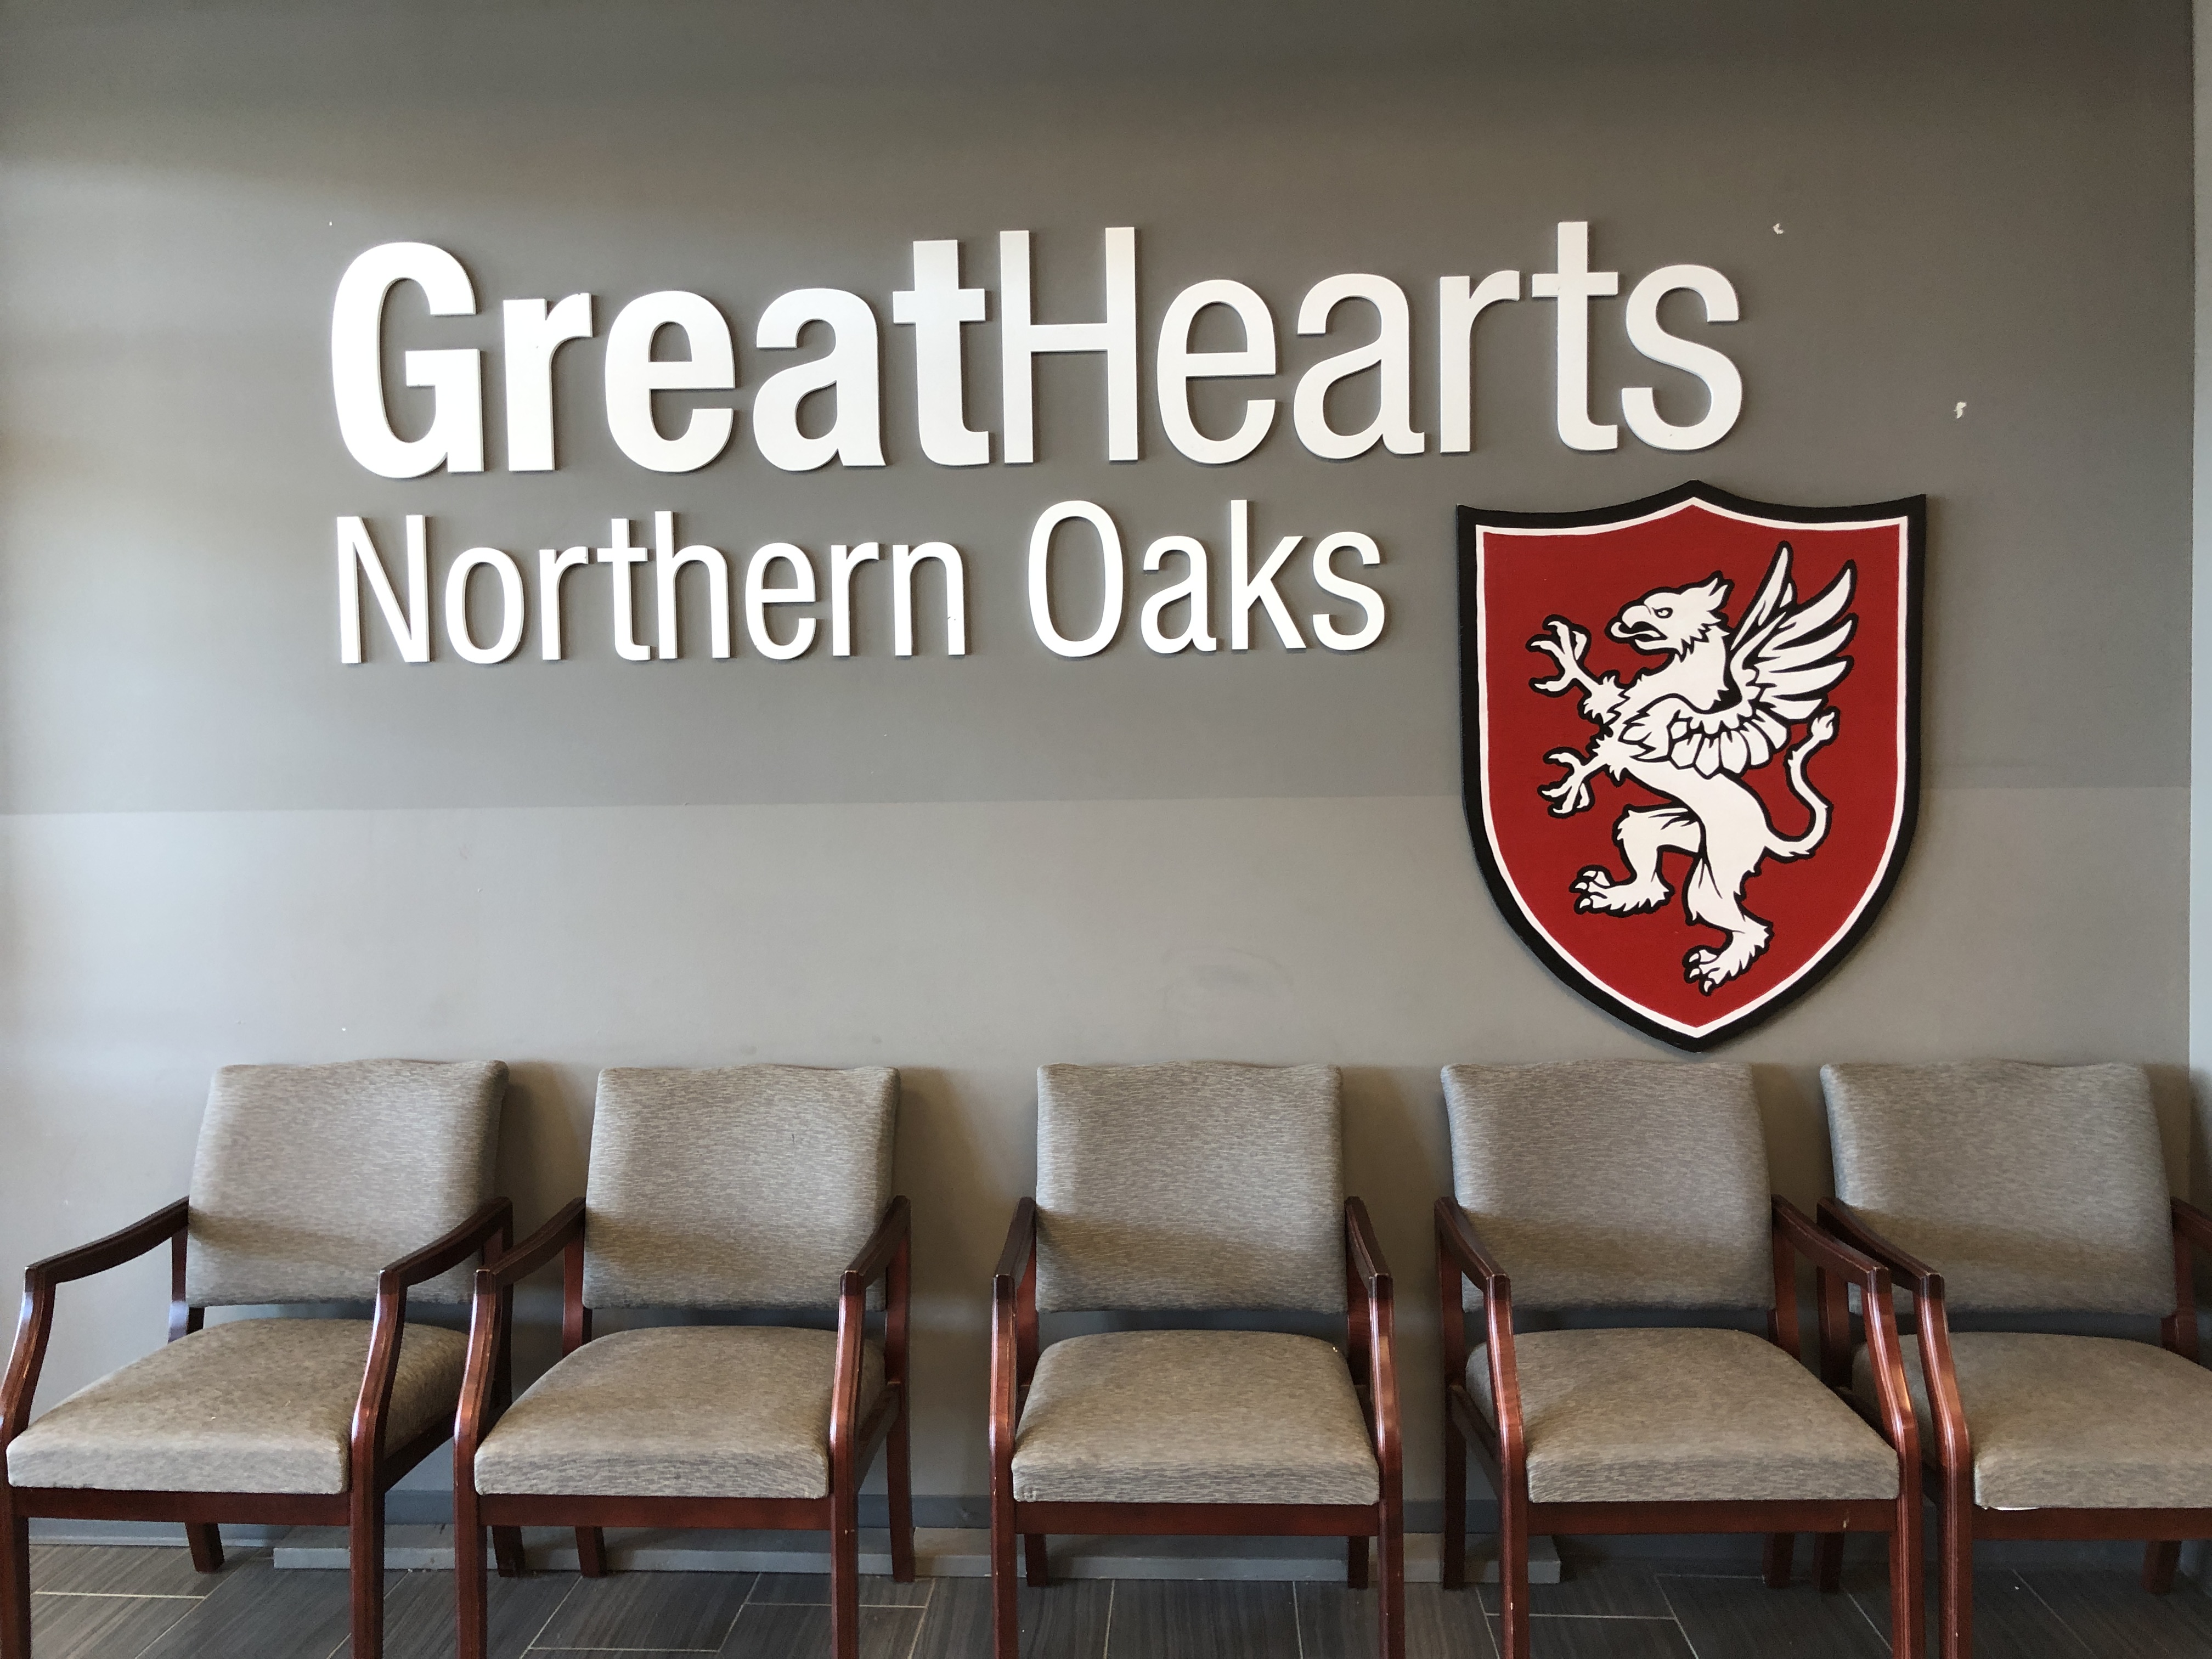 great hearts northern oaks logo on school wall above chairs